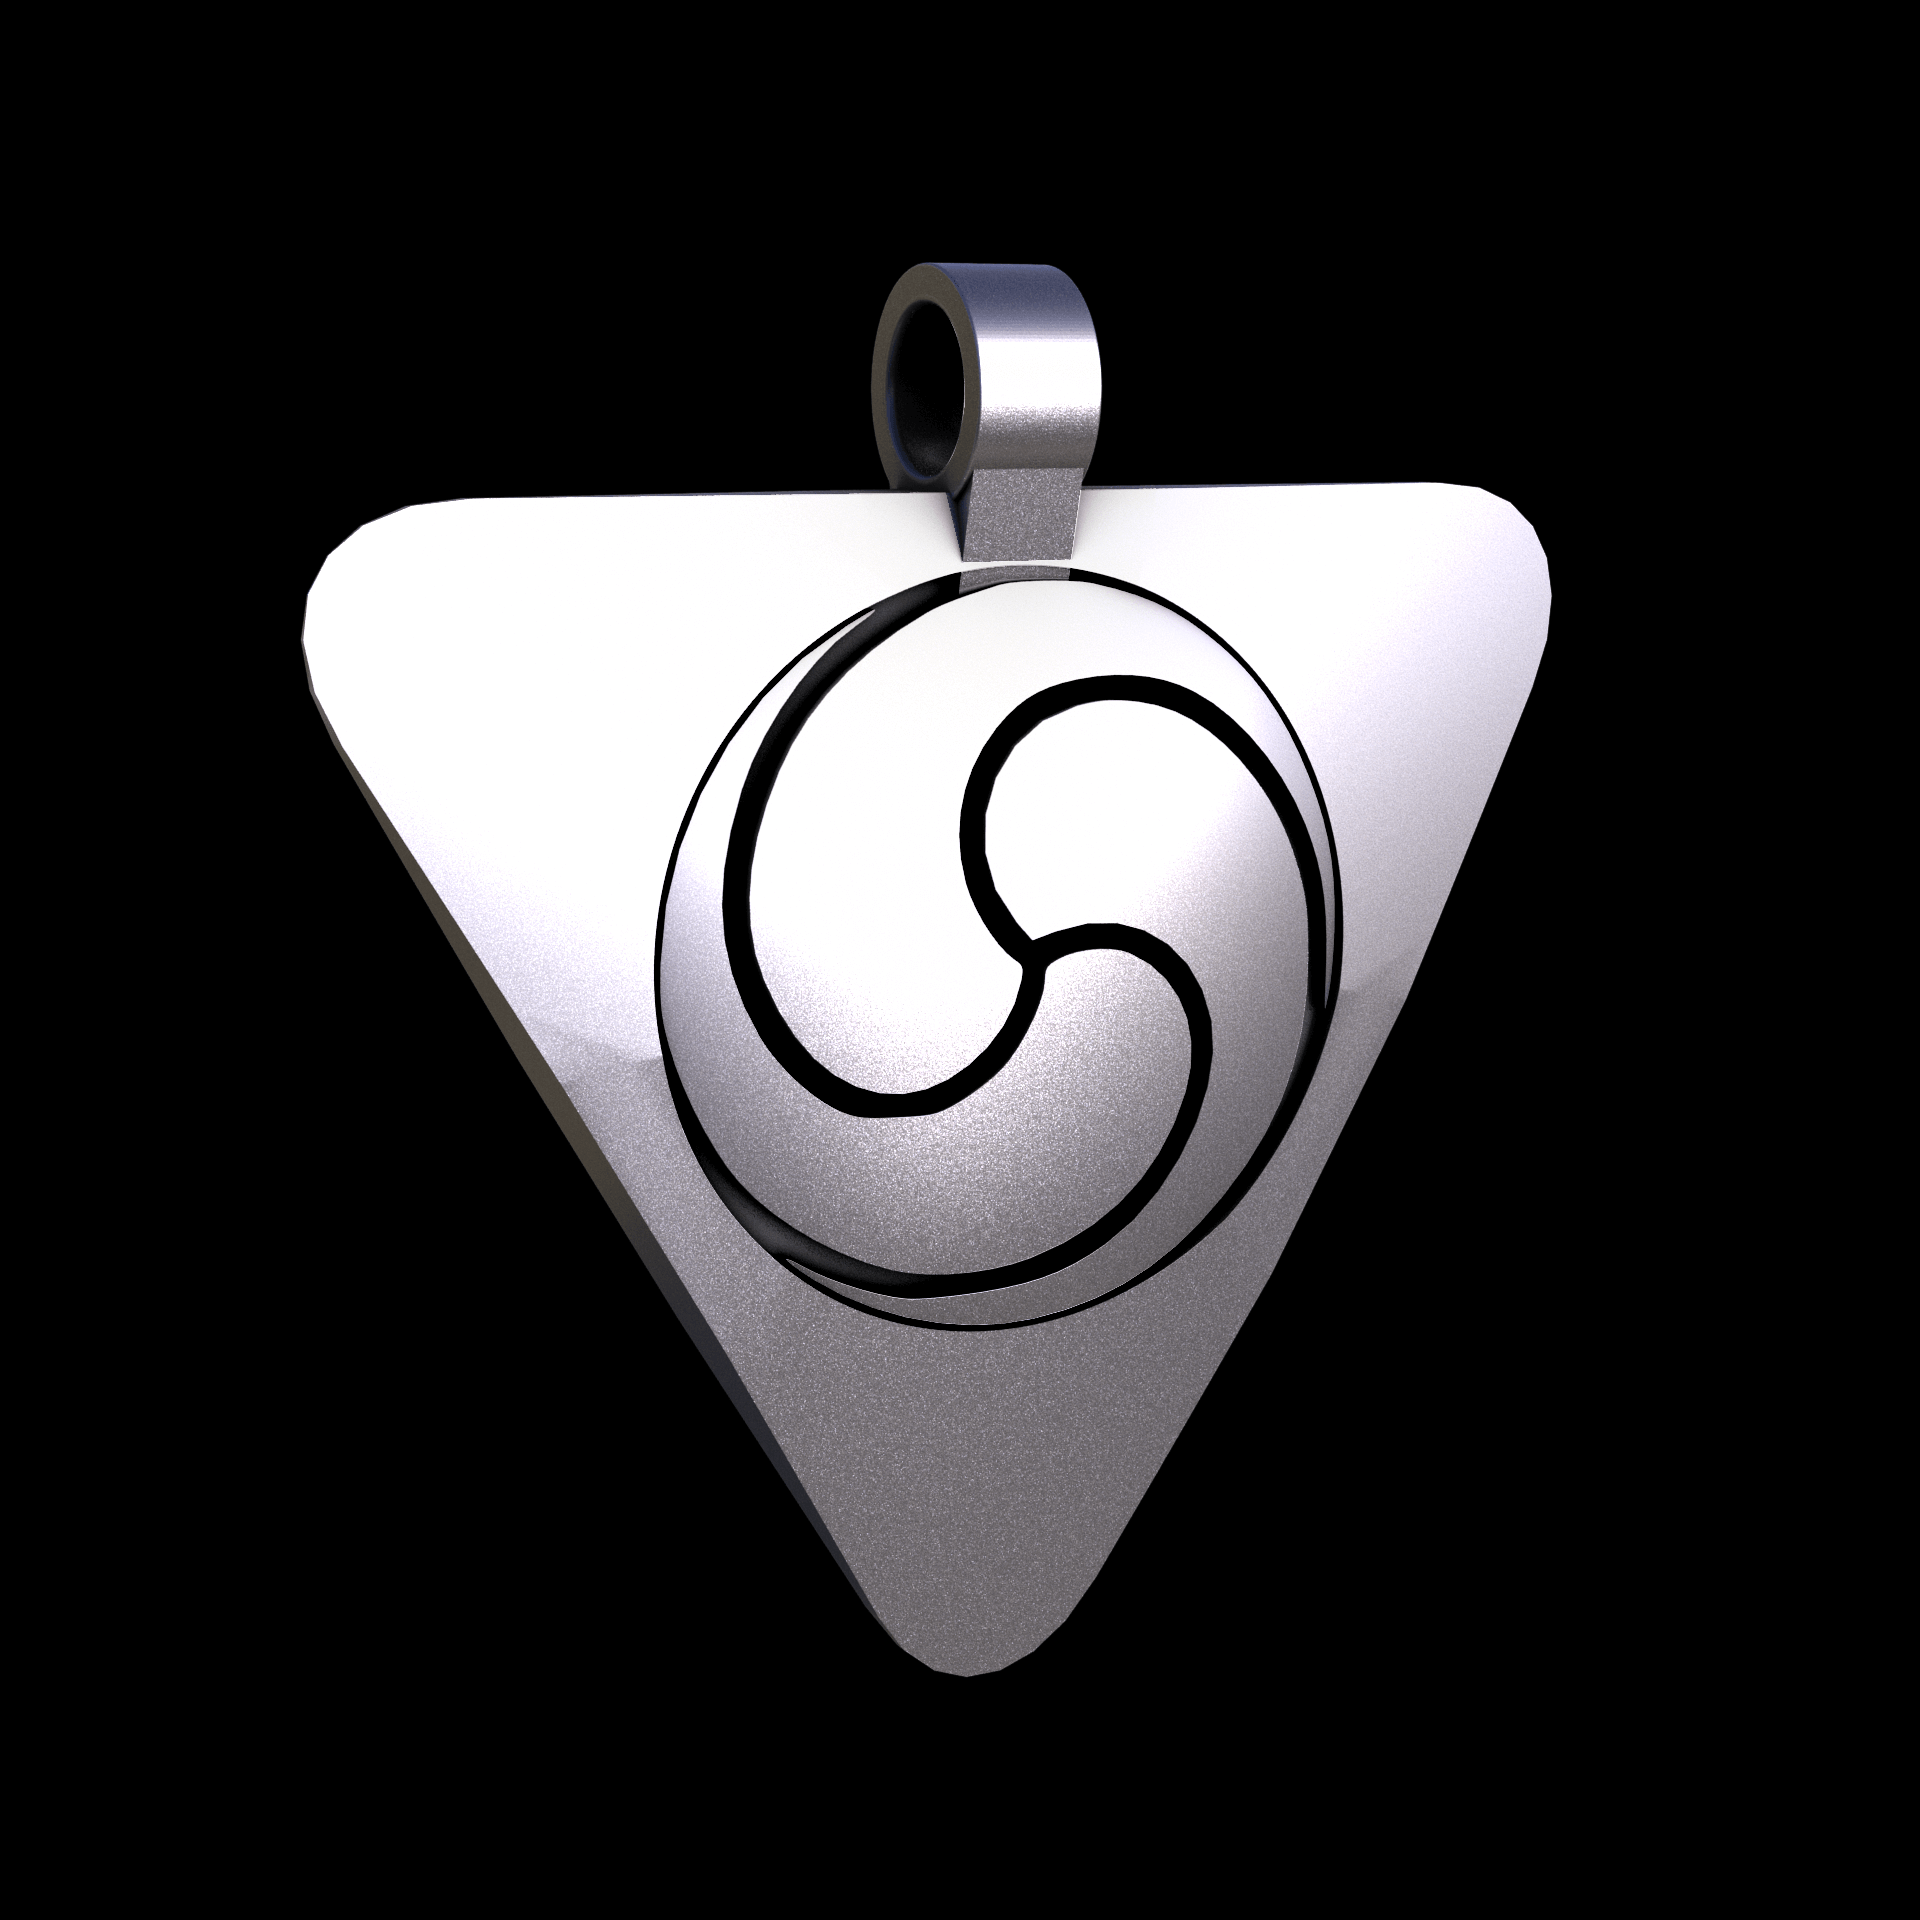 Sterling silver manufactured using wax casting, and lightly polished with a rough matte surface finish.